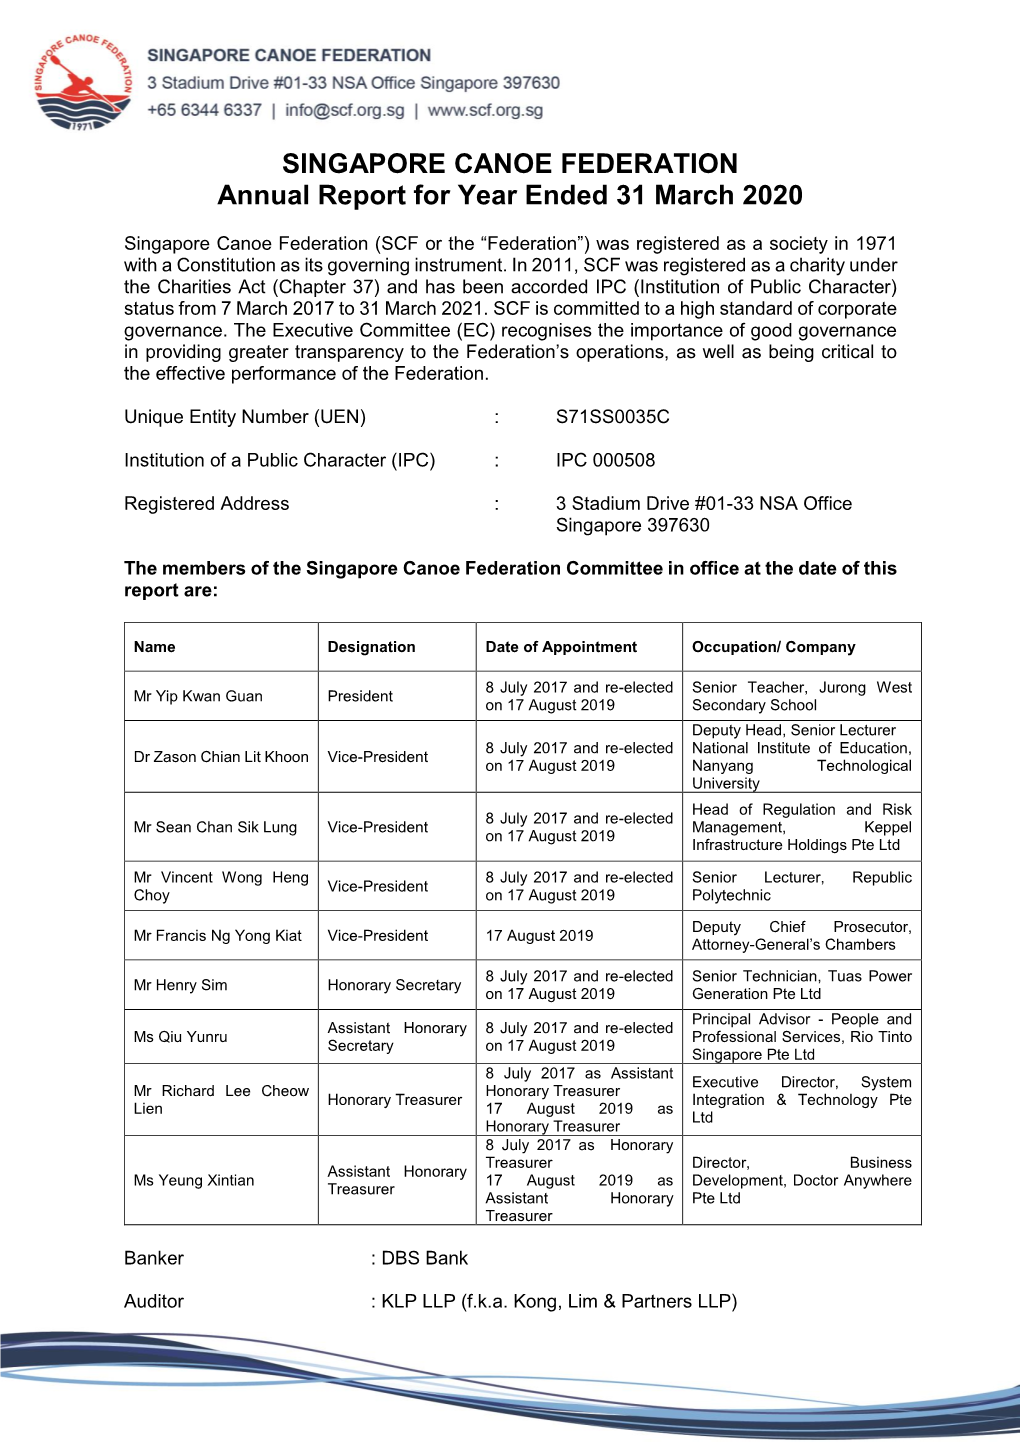 SINGAPORE CANOE FEDERATION Annual Report for Year Ended 31 March 2020